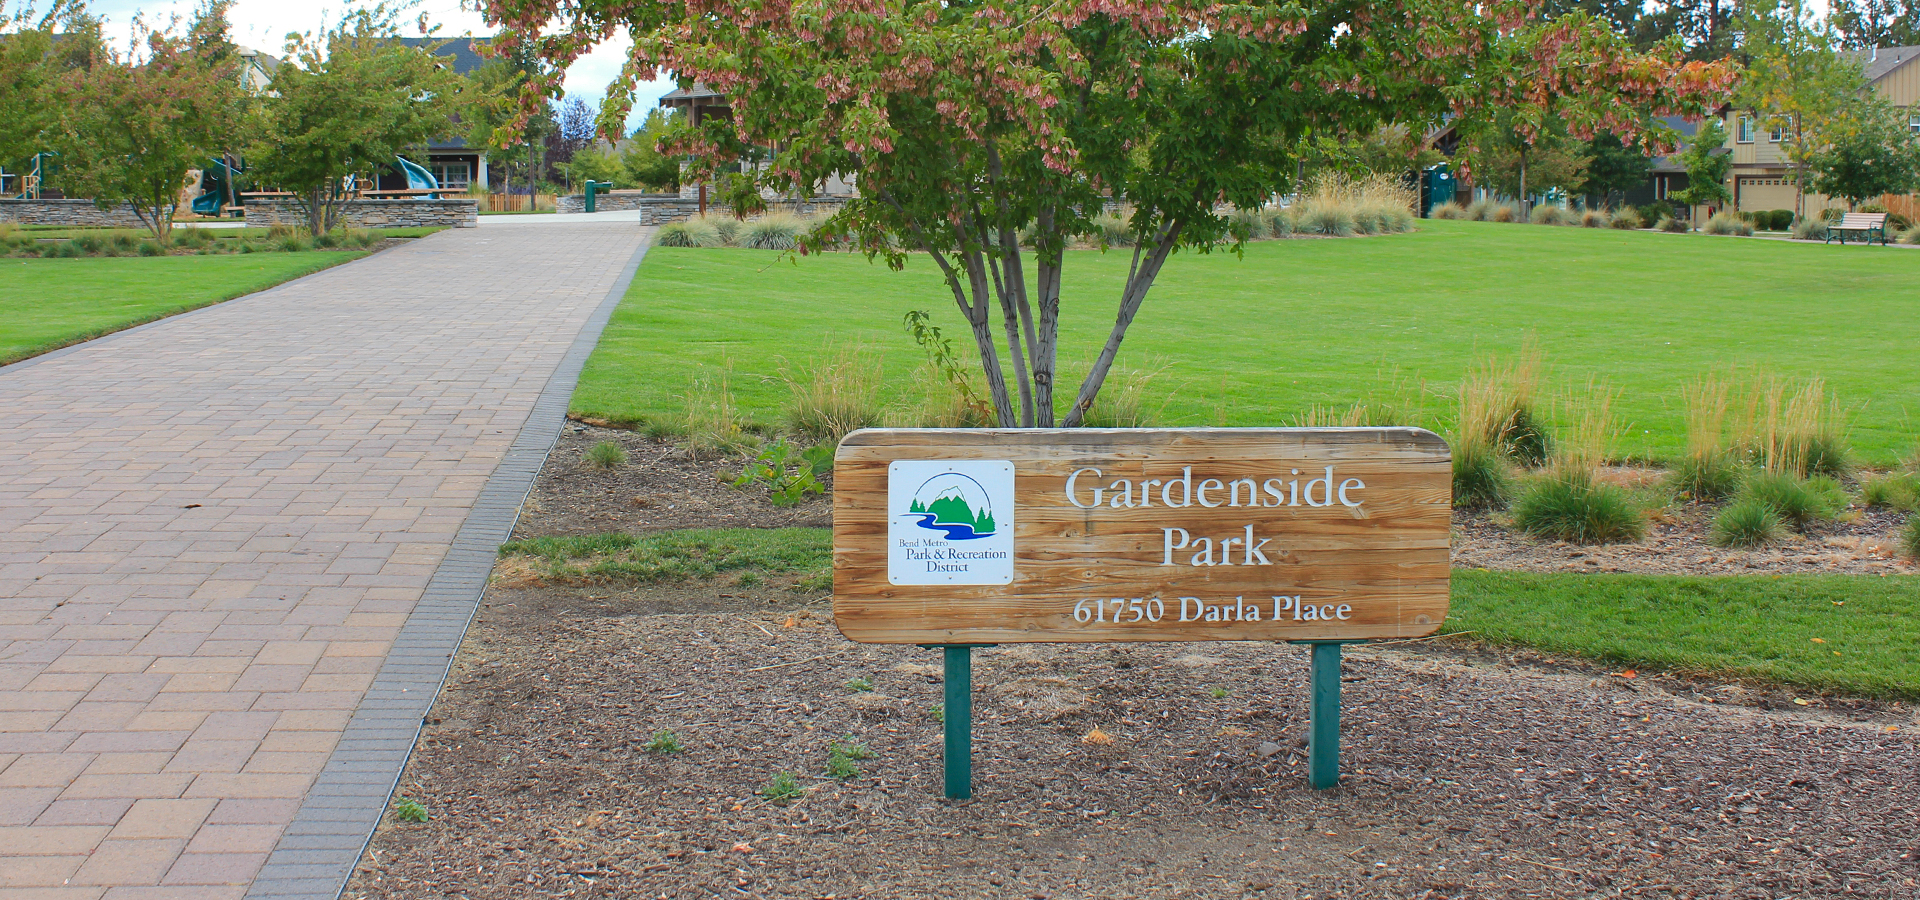 Gardenside park's sign and greenspace.